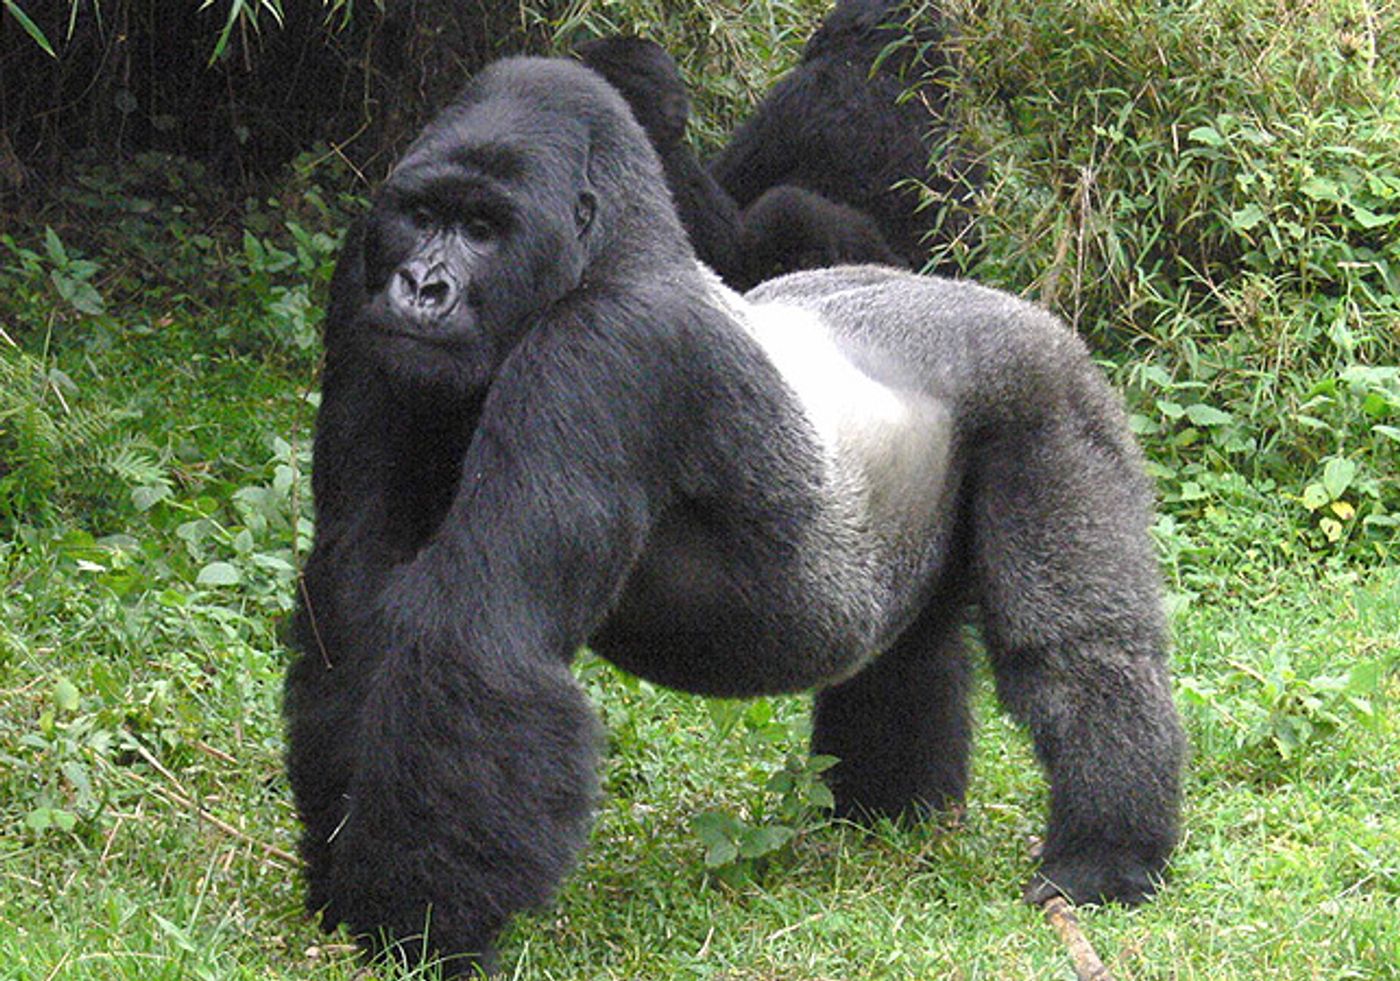 The Eastern Gorilla is now considered "Critically Endangered."